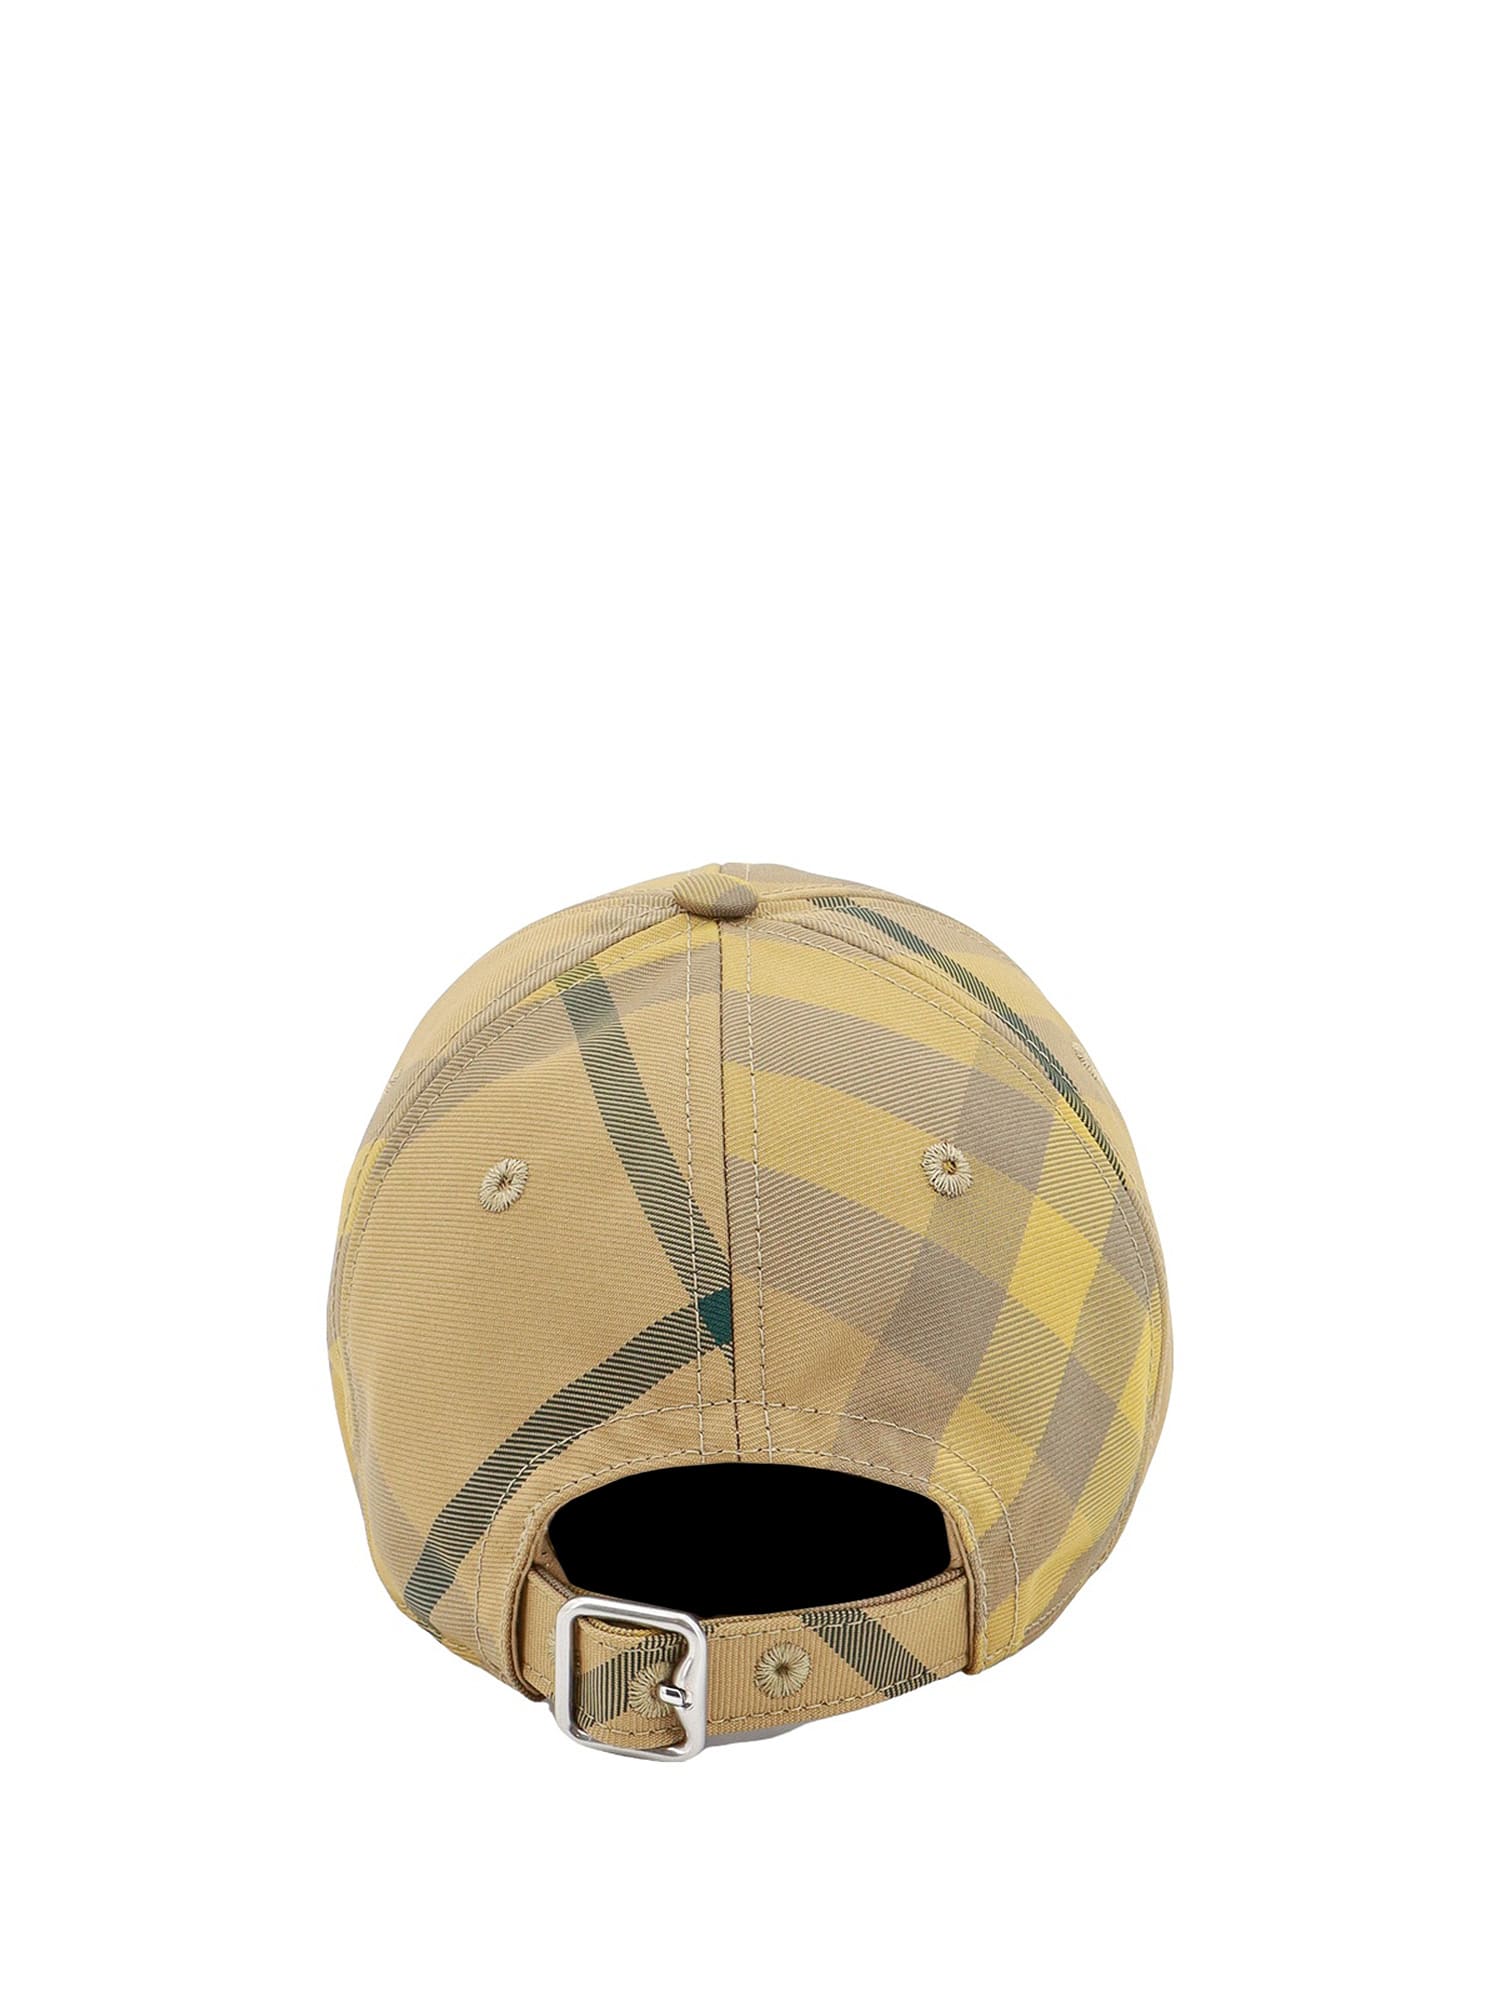 Shop Burberry Bias Check Hat In Yellow